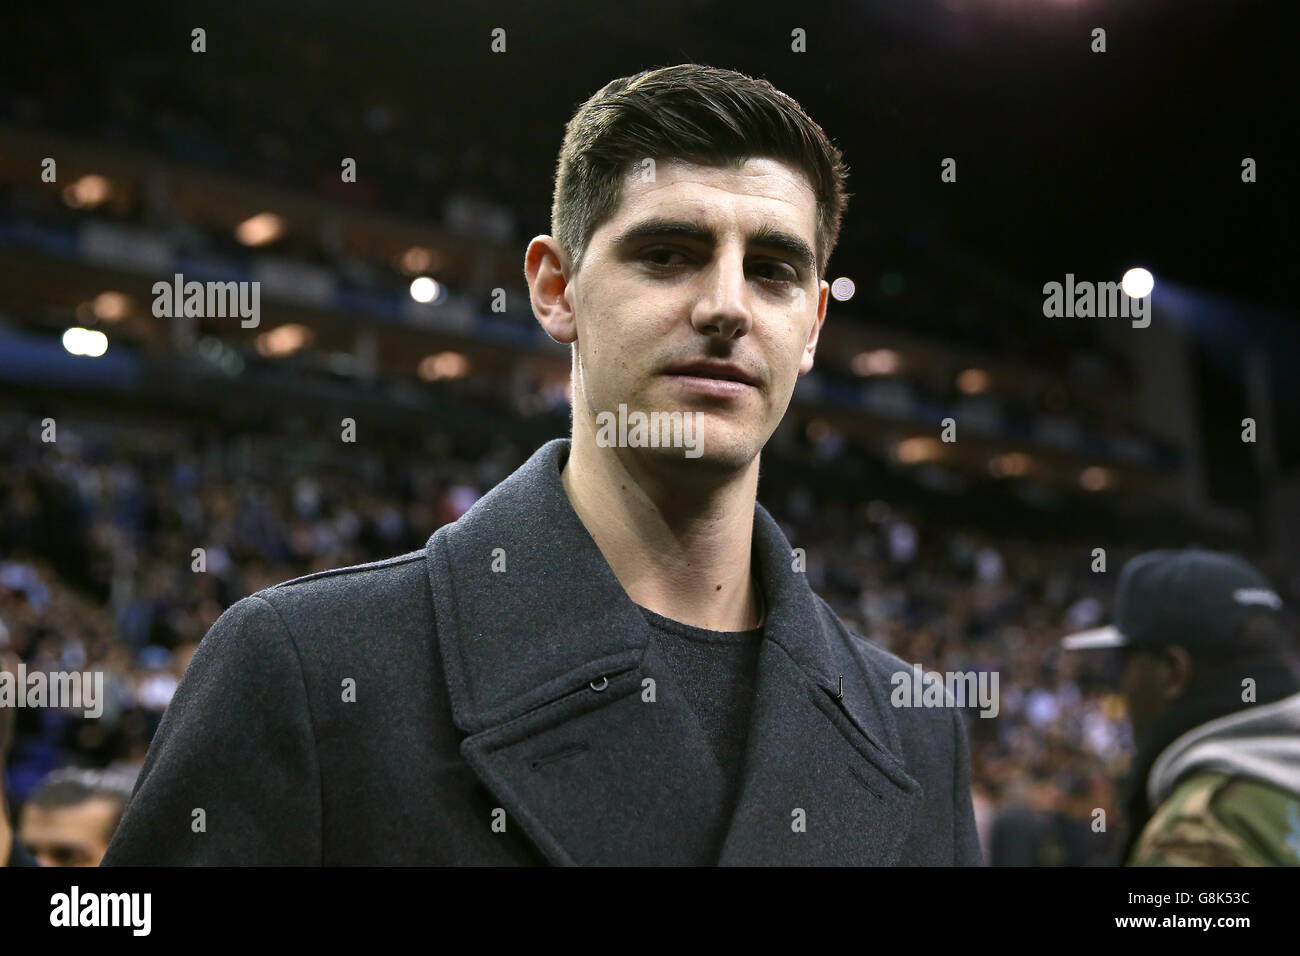 Chelsea goalkeeper Thibaut Courtois at the NBA Global Games match at the O2 Arena, London. Stock Photo